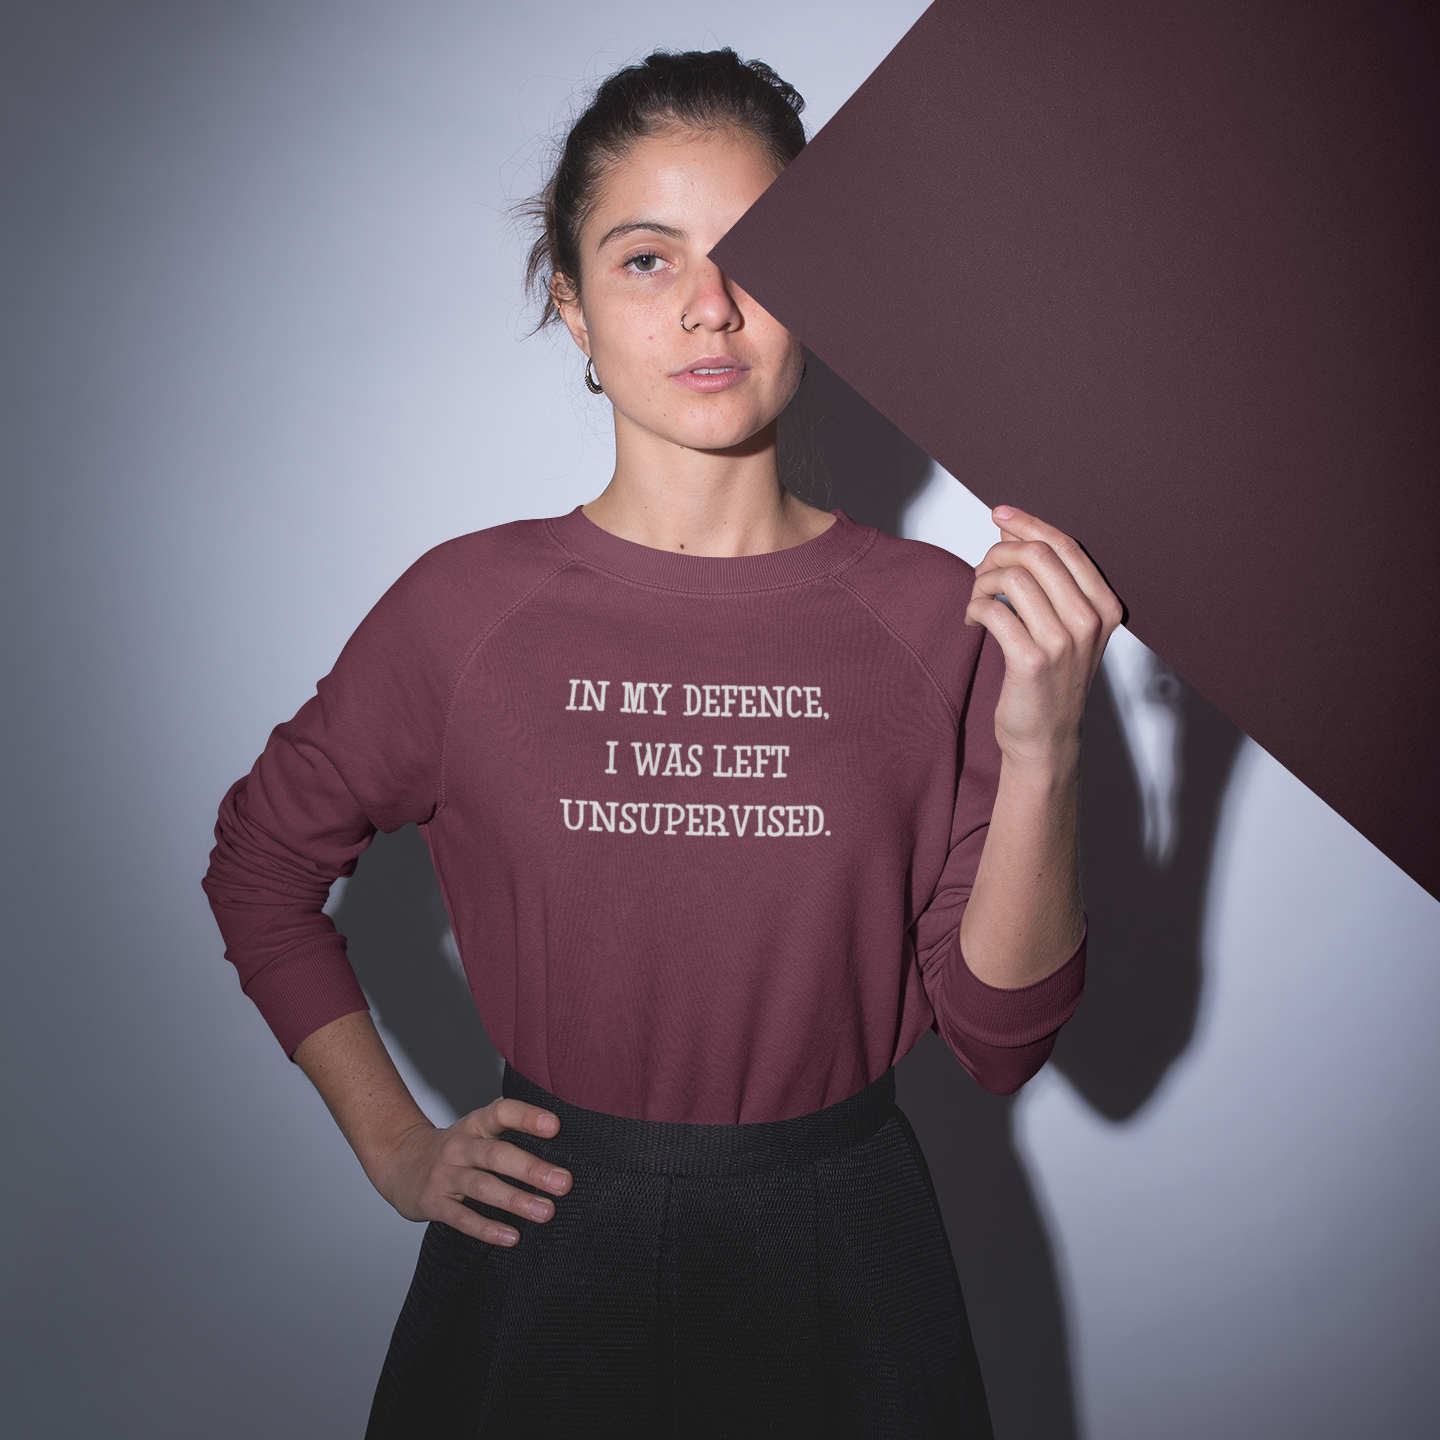 'In my defence, I was left unsupervised' sweater